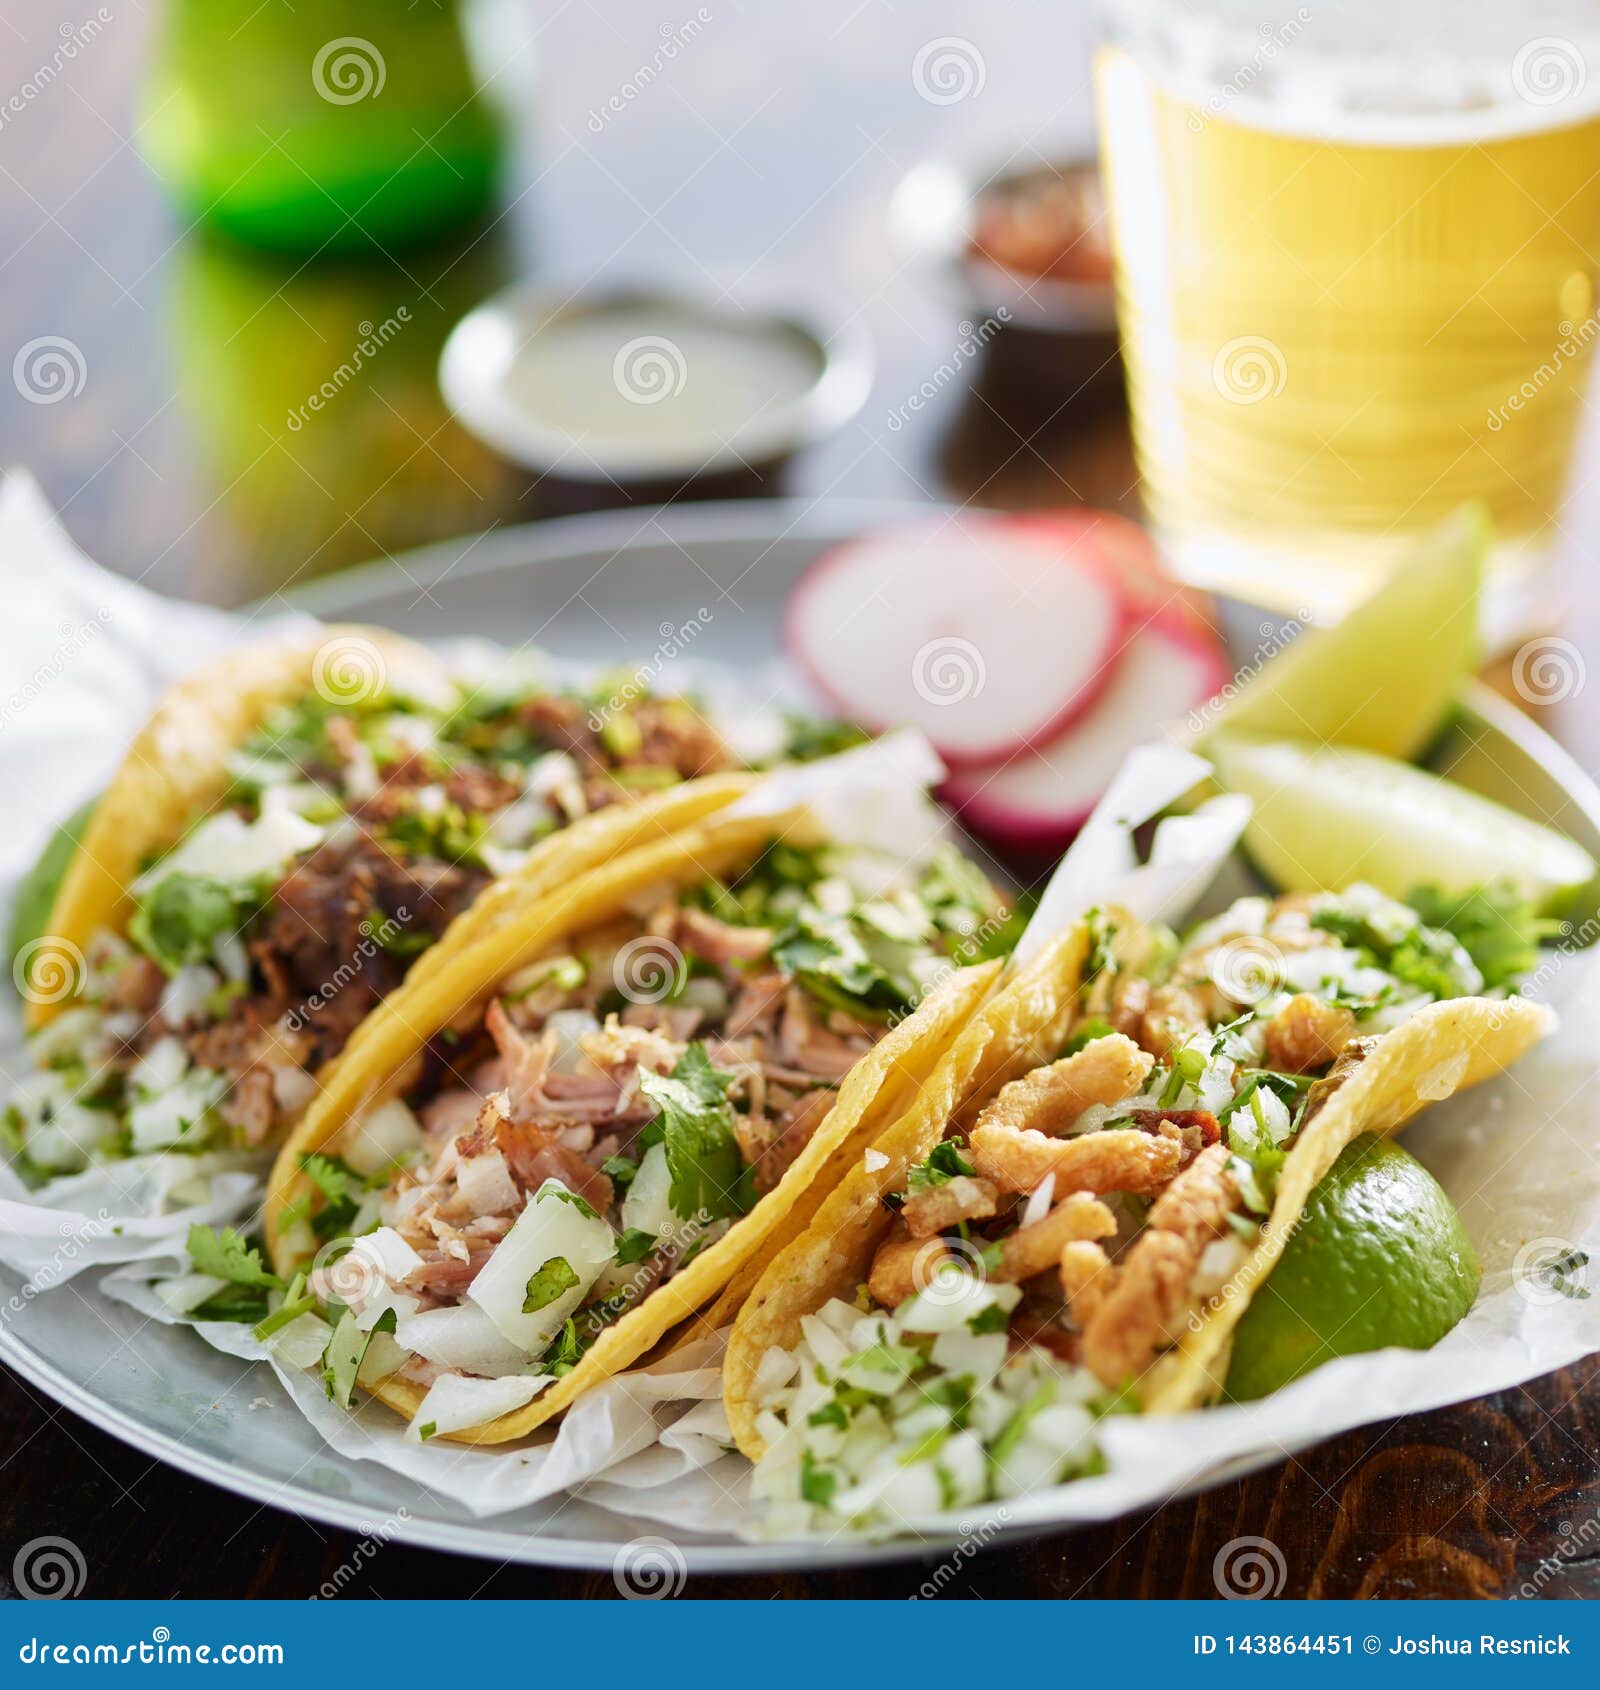 three types of mexican street tacos with barbacoa, carnitas and chicharrÃÂ³n